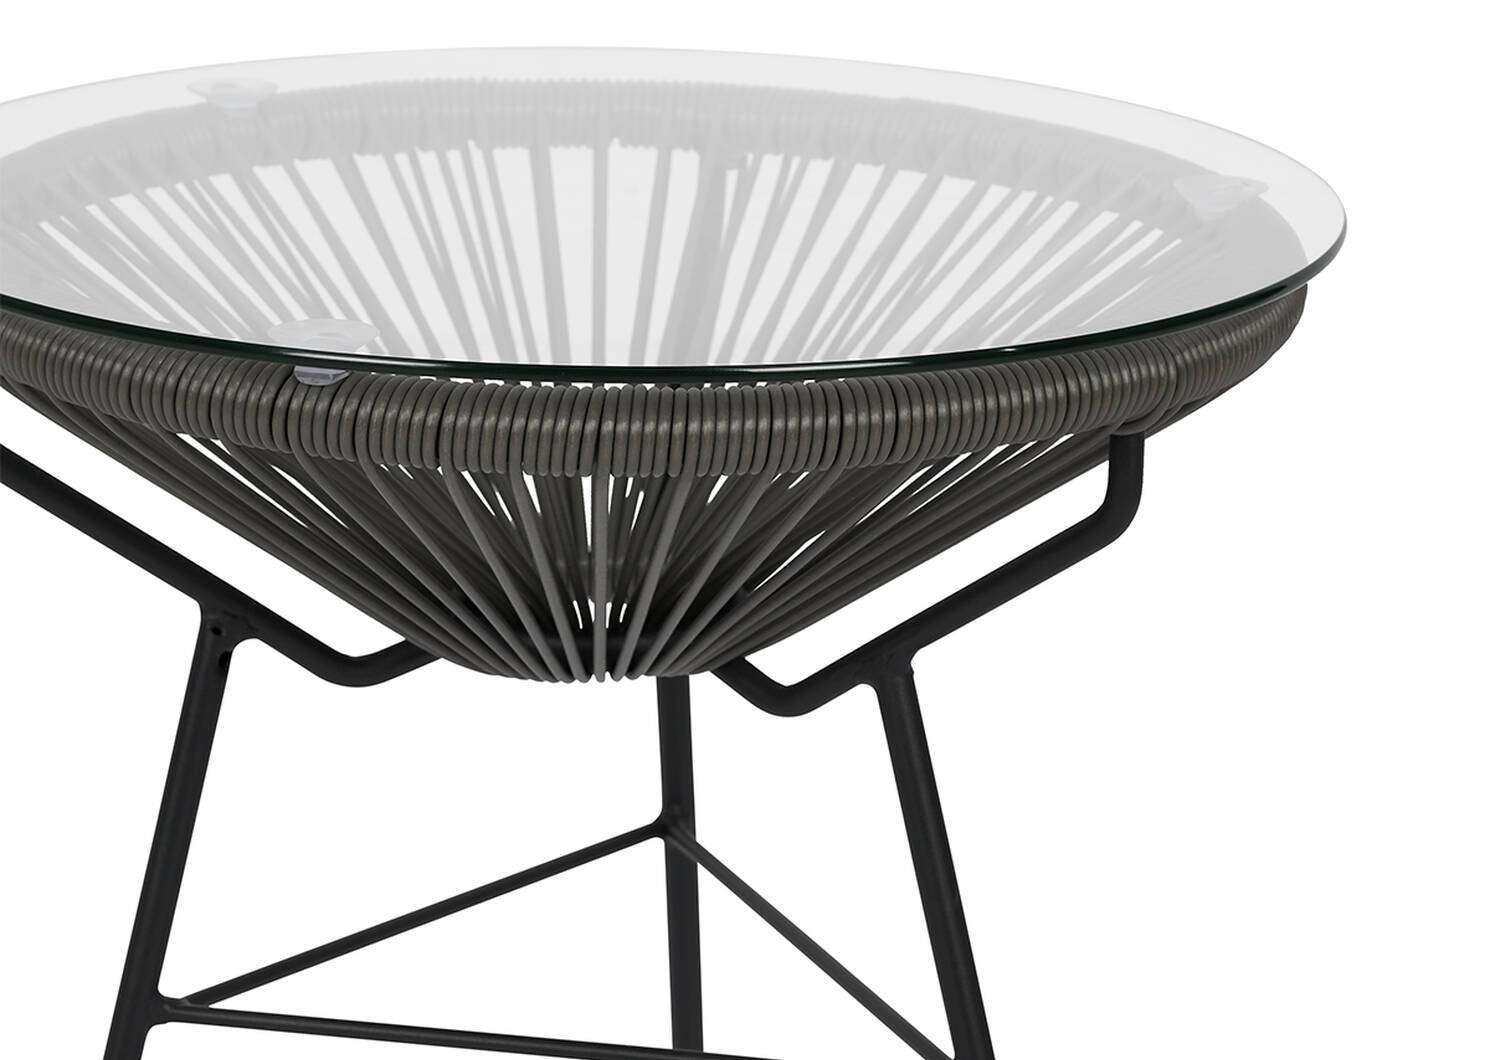 Table d'appoint Fresno -Tao gris